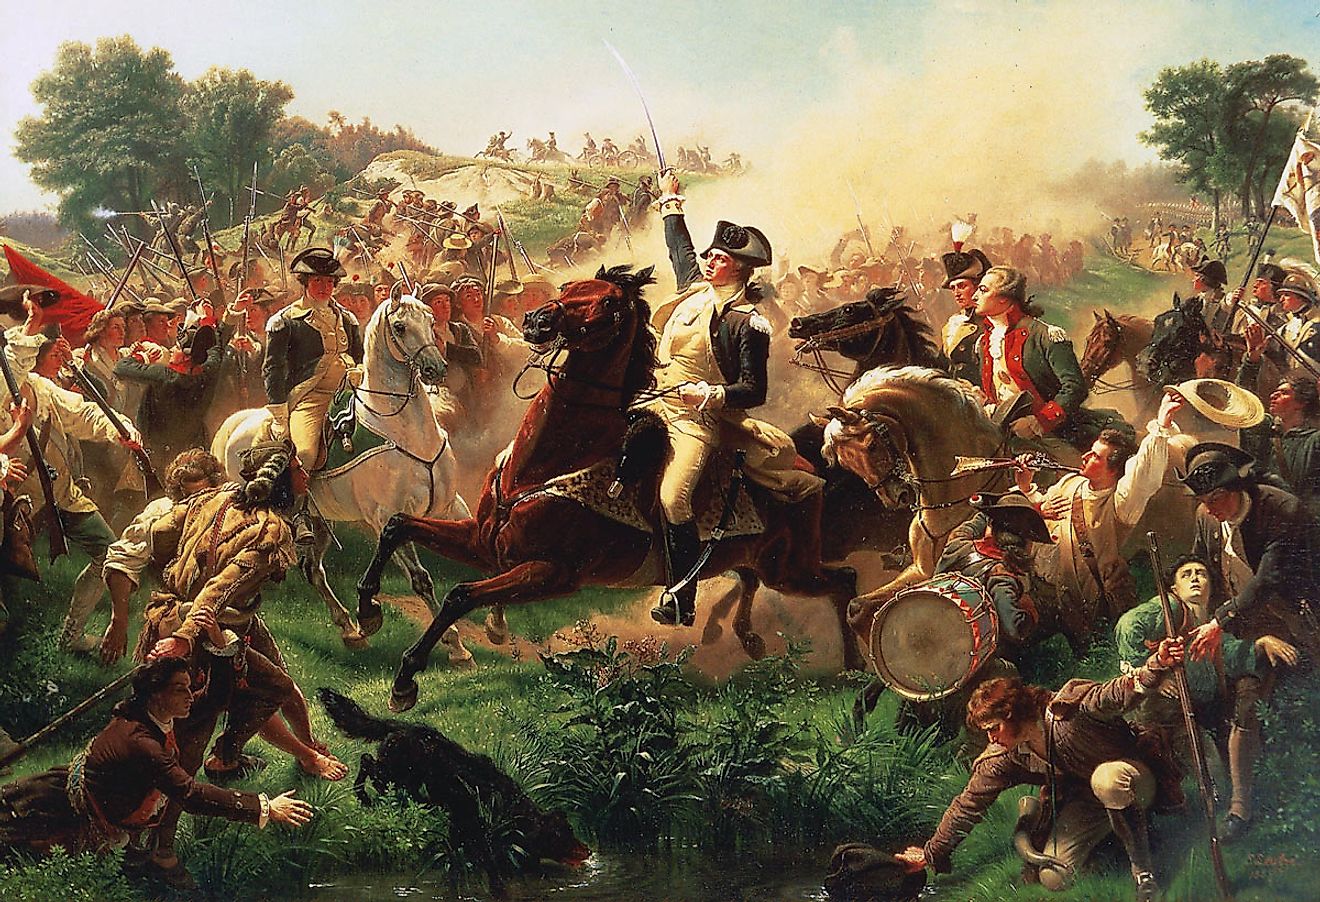 Washington Rallying the Troops at Monmouth. Image credit: Emanuel Leutze / Public domain